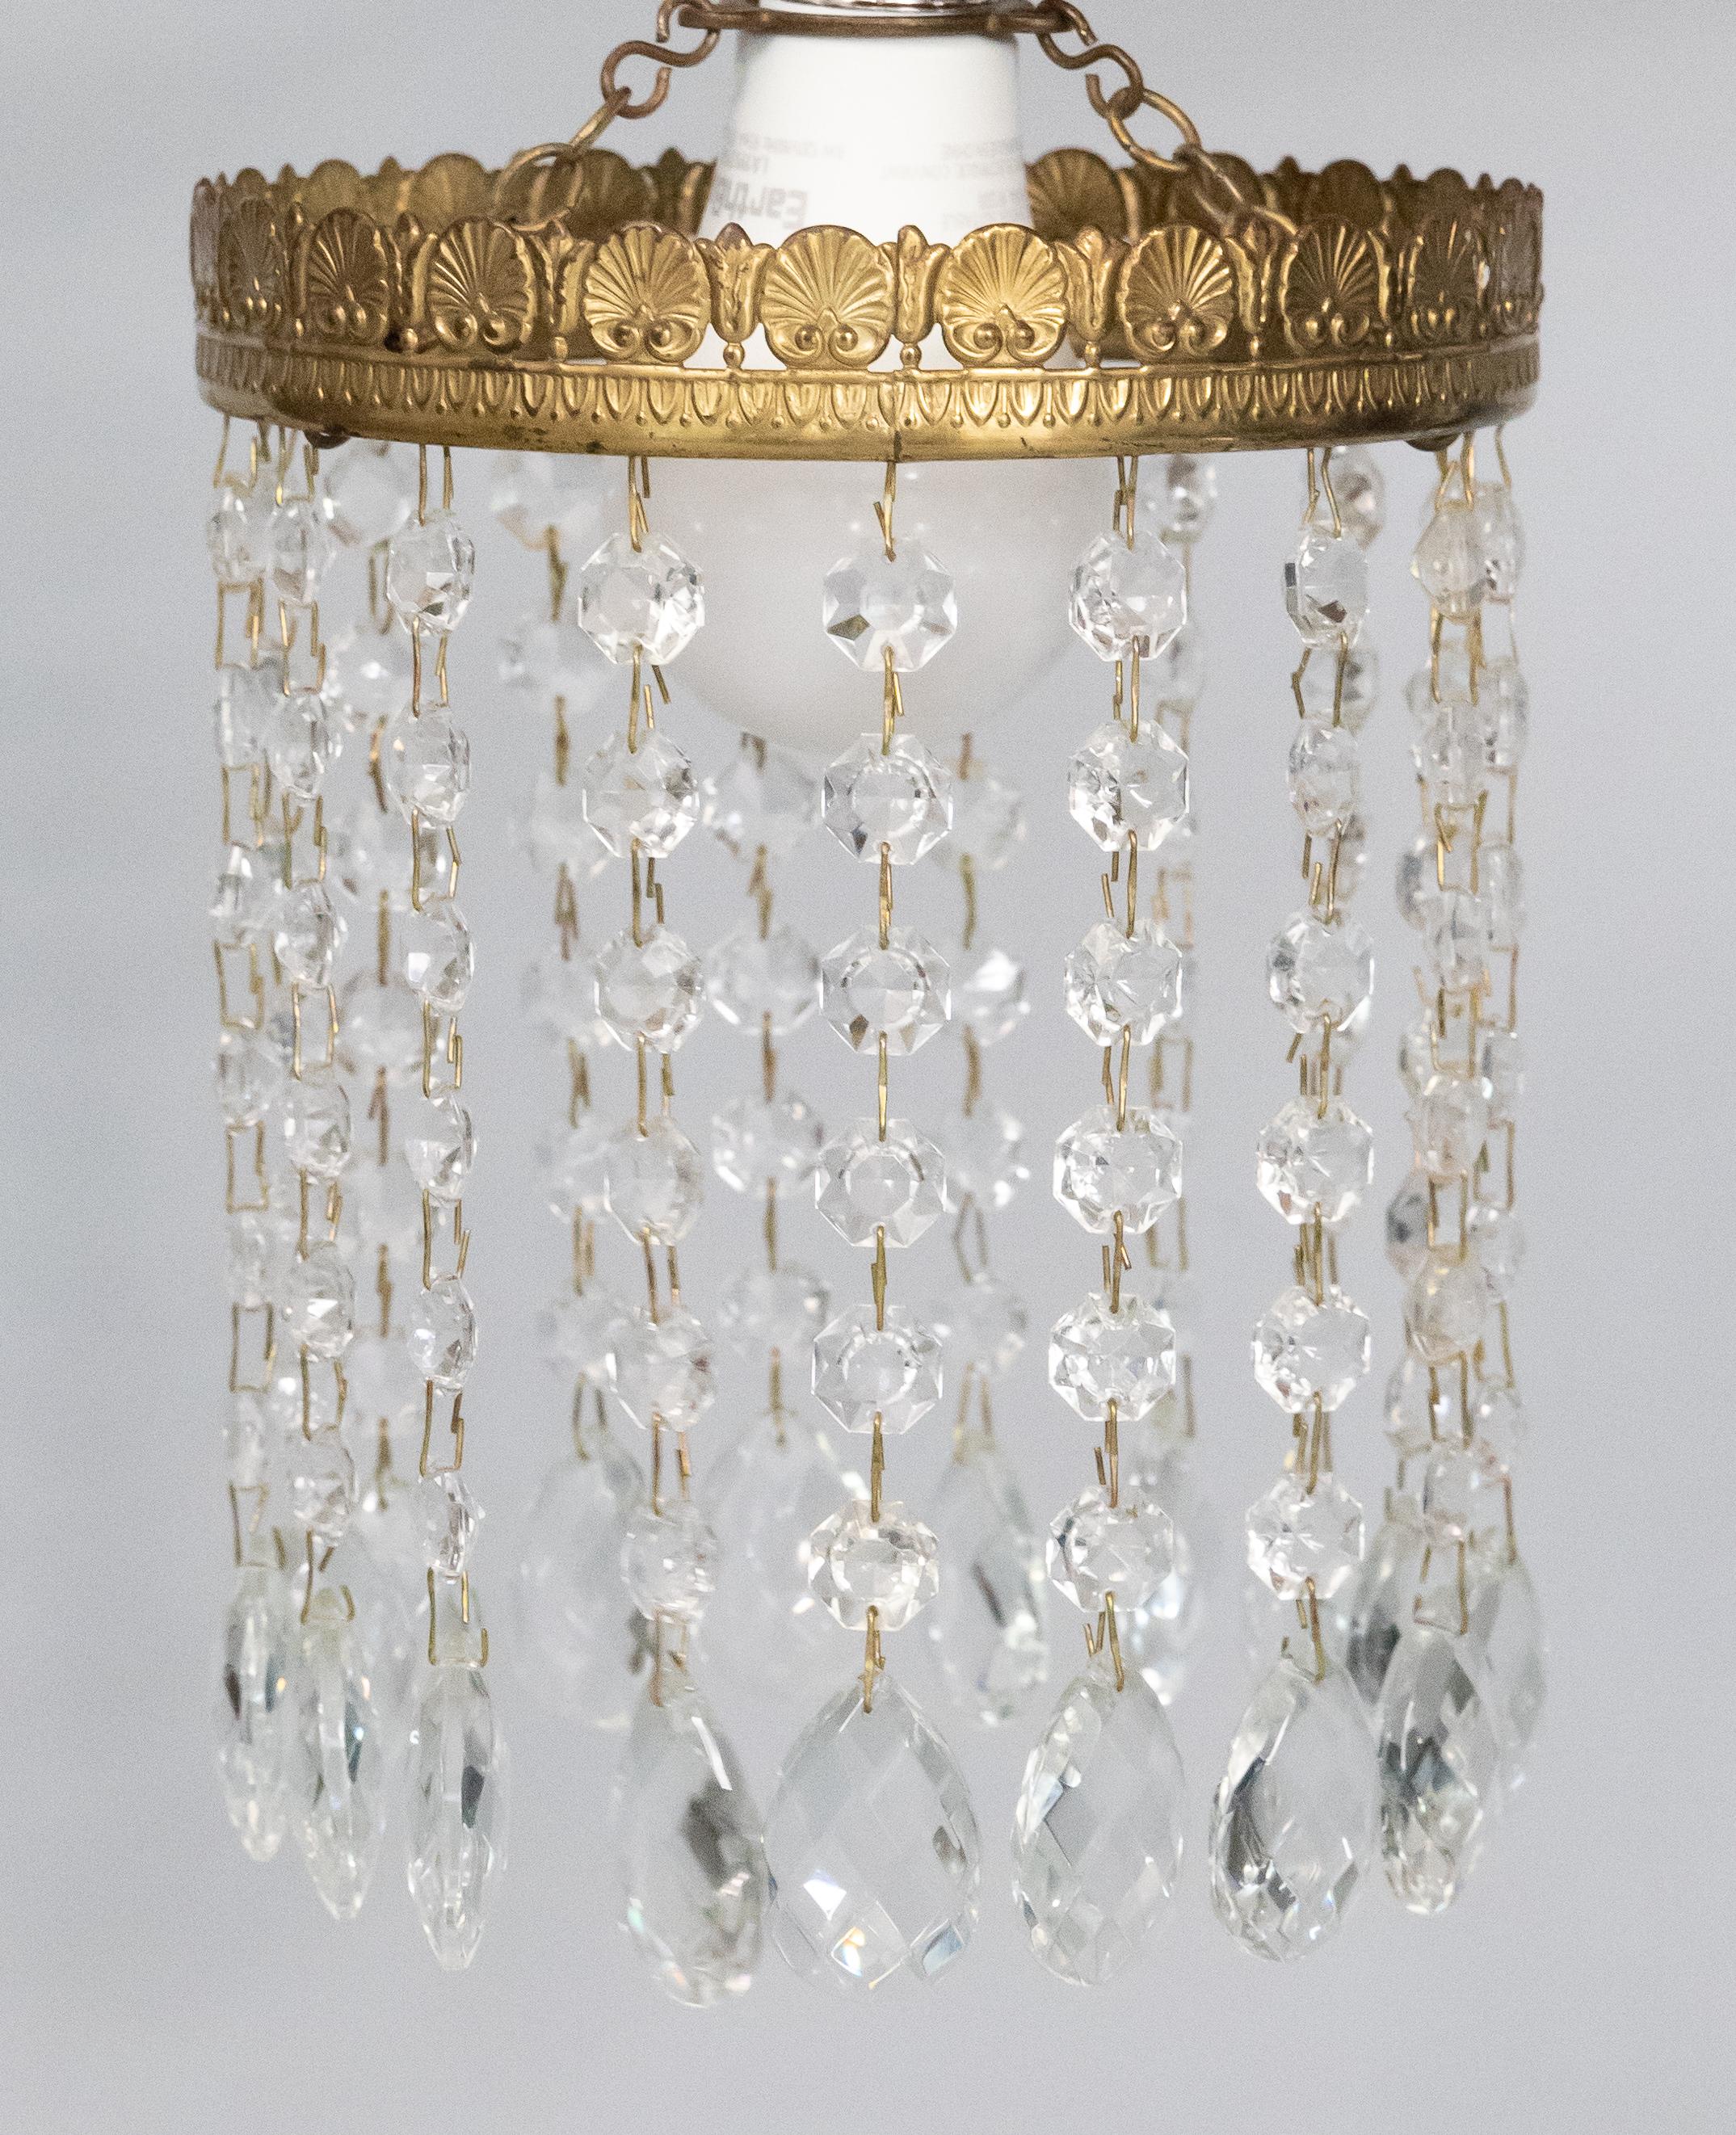 A gorgeous petite 1920s French electrolier chandelier light shade with glass droplets suspended from a gilded ormolu brass crown frame. This lovely chandelier can be fitted around an ordinary ceiling pendant light bulb, casting a pleasant light,